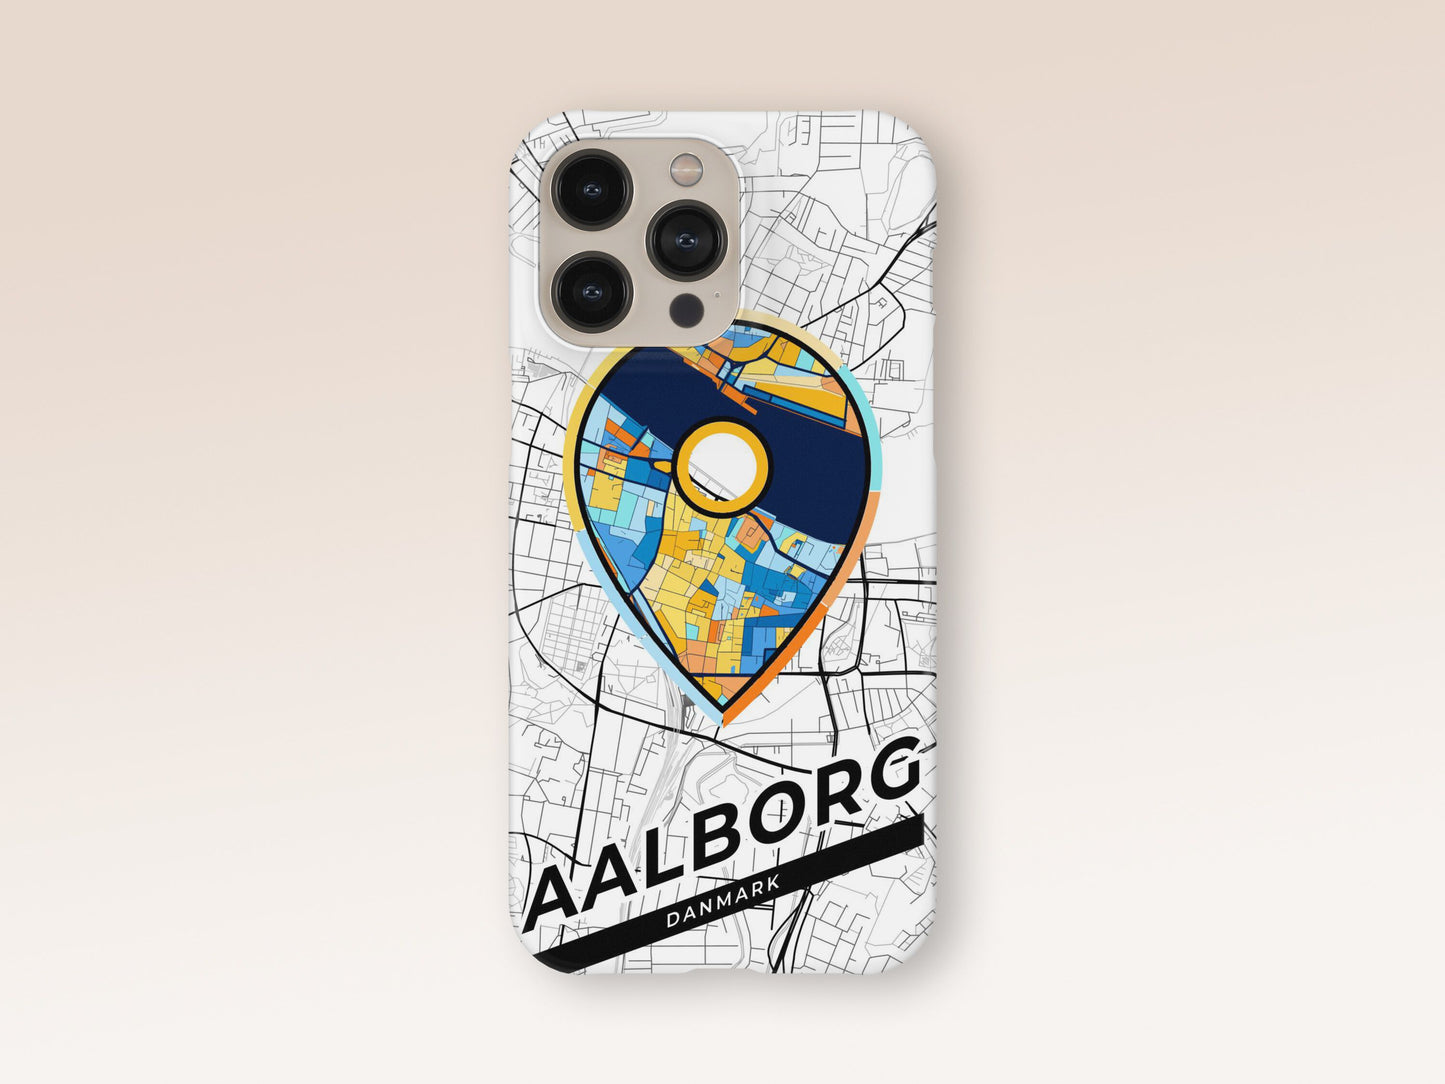 Aalborg Danmark slim phone case with colorful icon. Birthday, wedding or housewarming gift. Couple match cases. 1